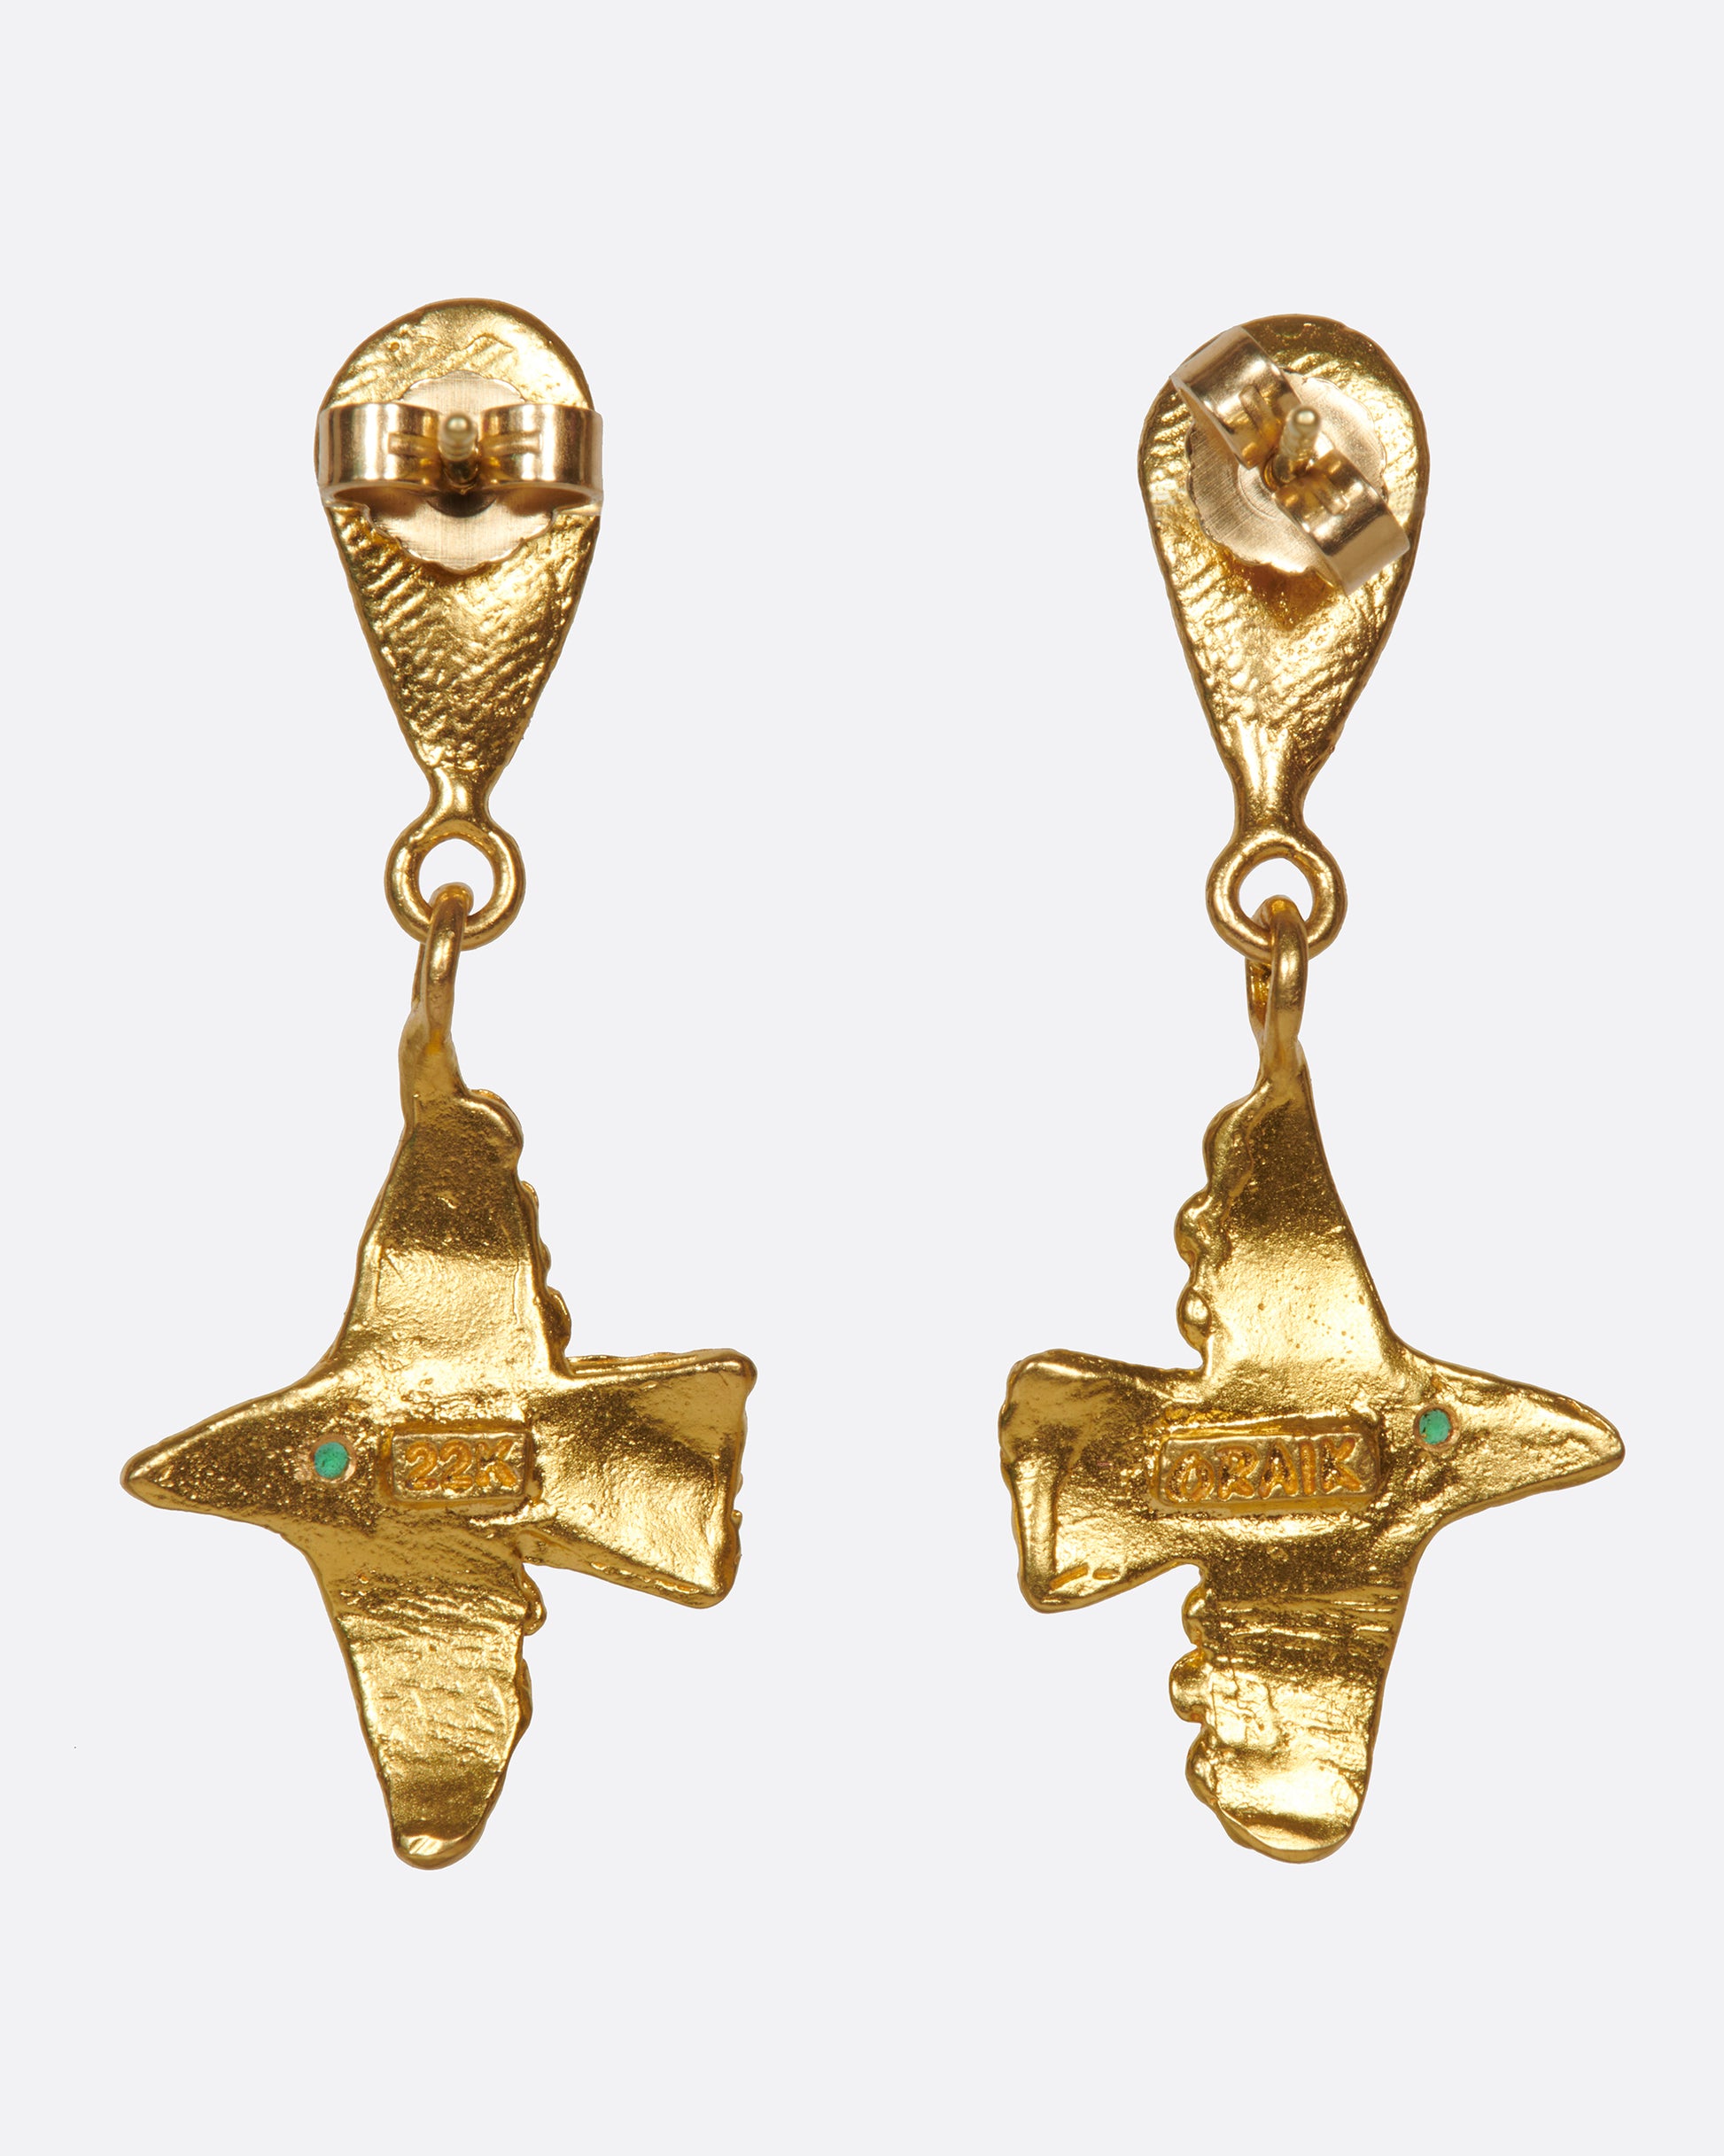 A pair of high karat gold drop earrings with flying birds and emerald eyes.